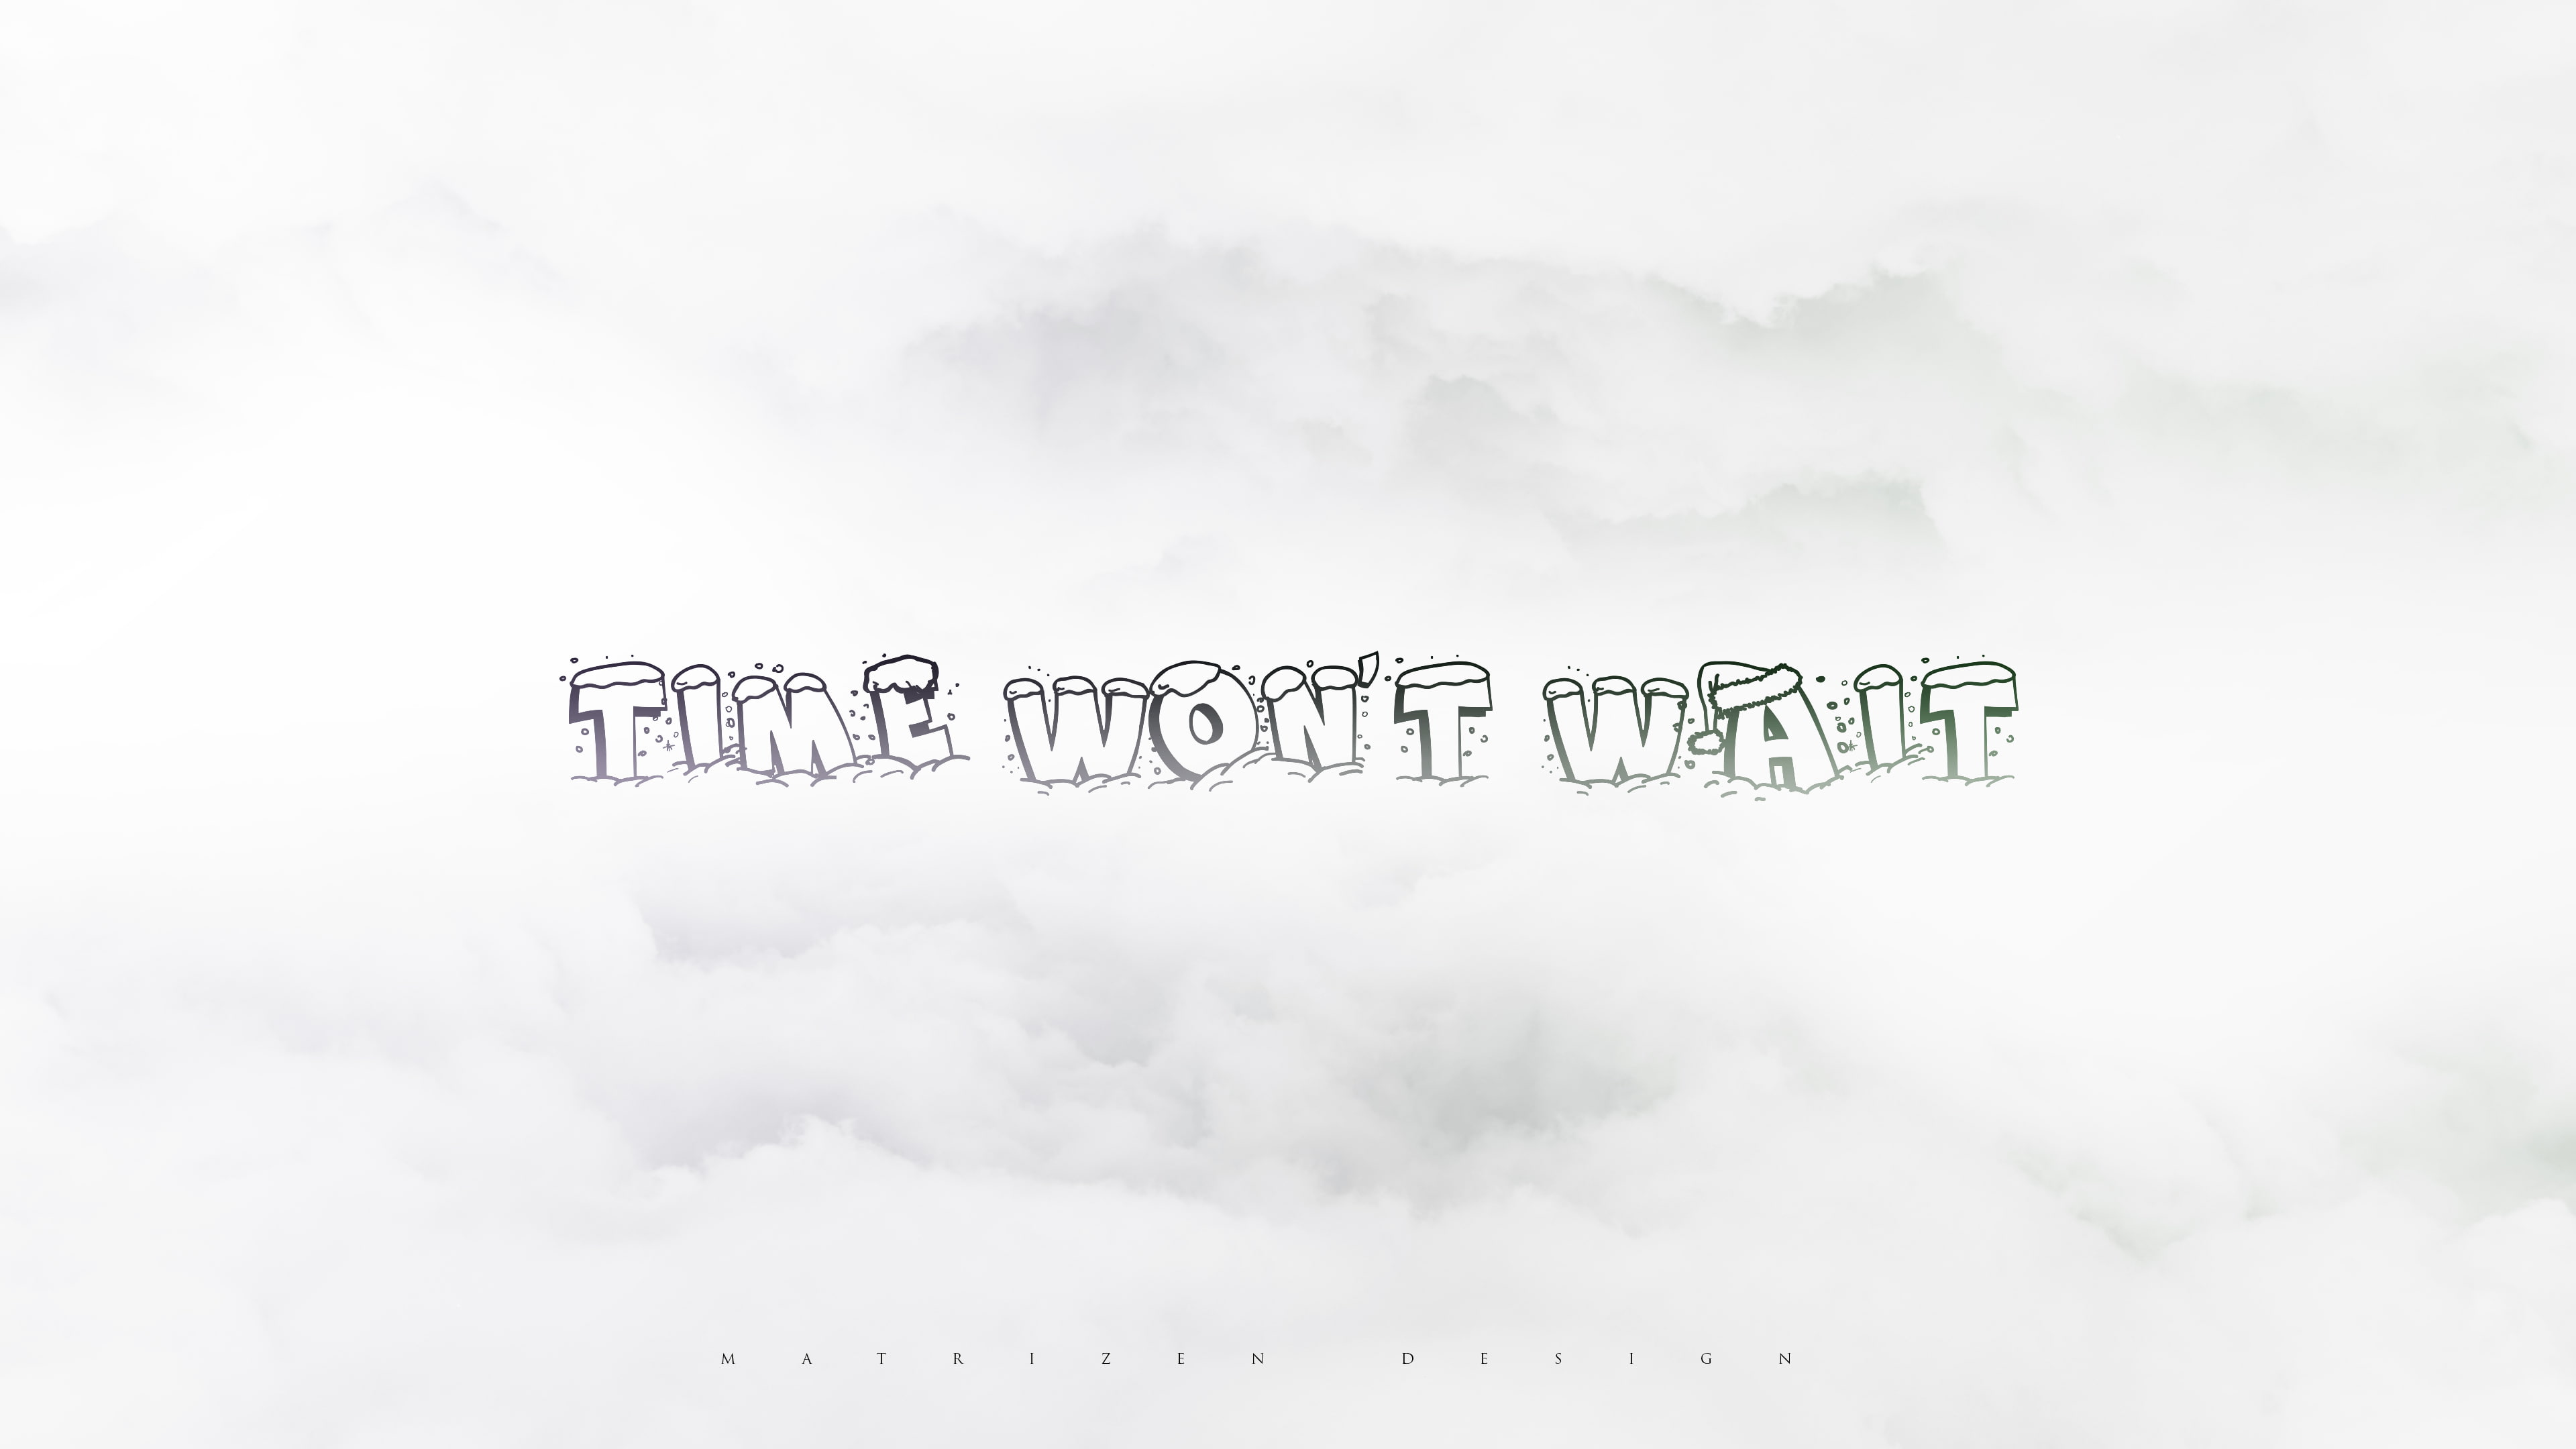 typography, quote, text, snow, digital art, minimalism, clouds